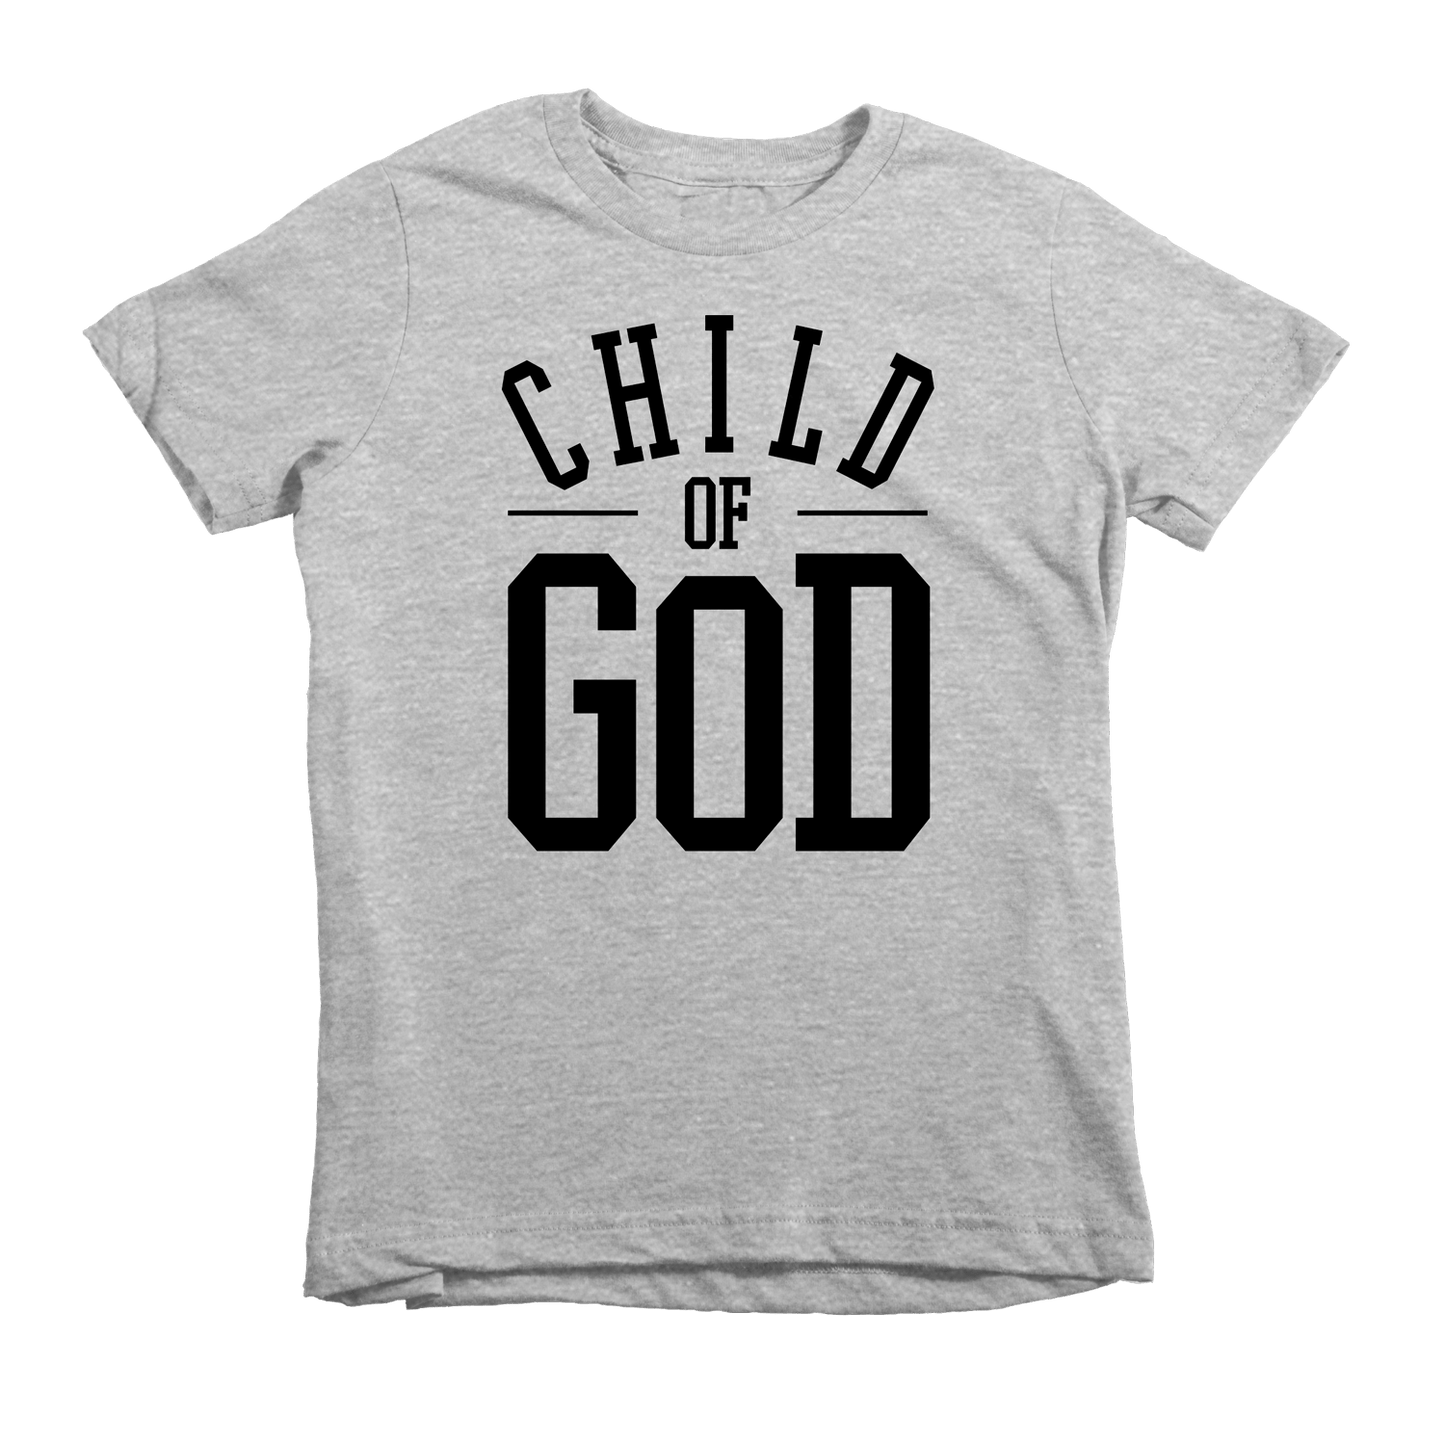 Child of God Tee - Beacon Threads - 2T / Grey w/ Black Lettering - 3